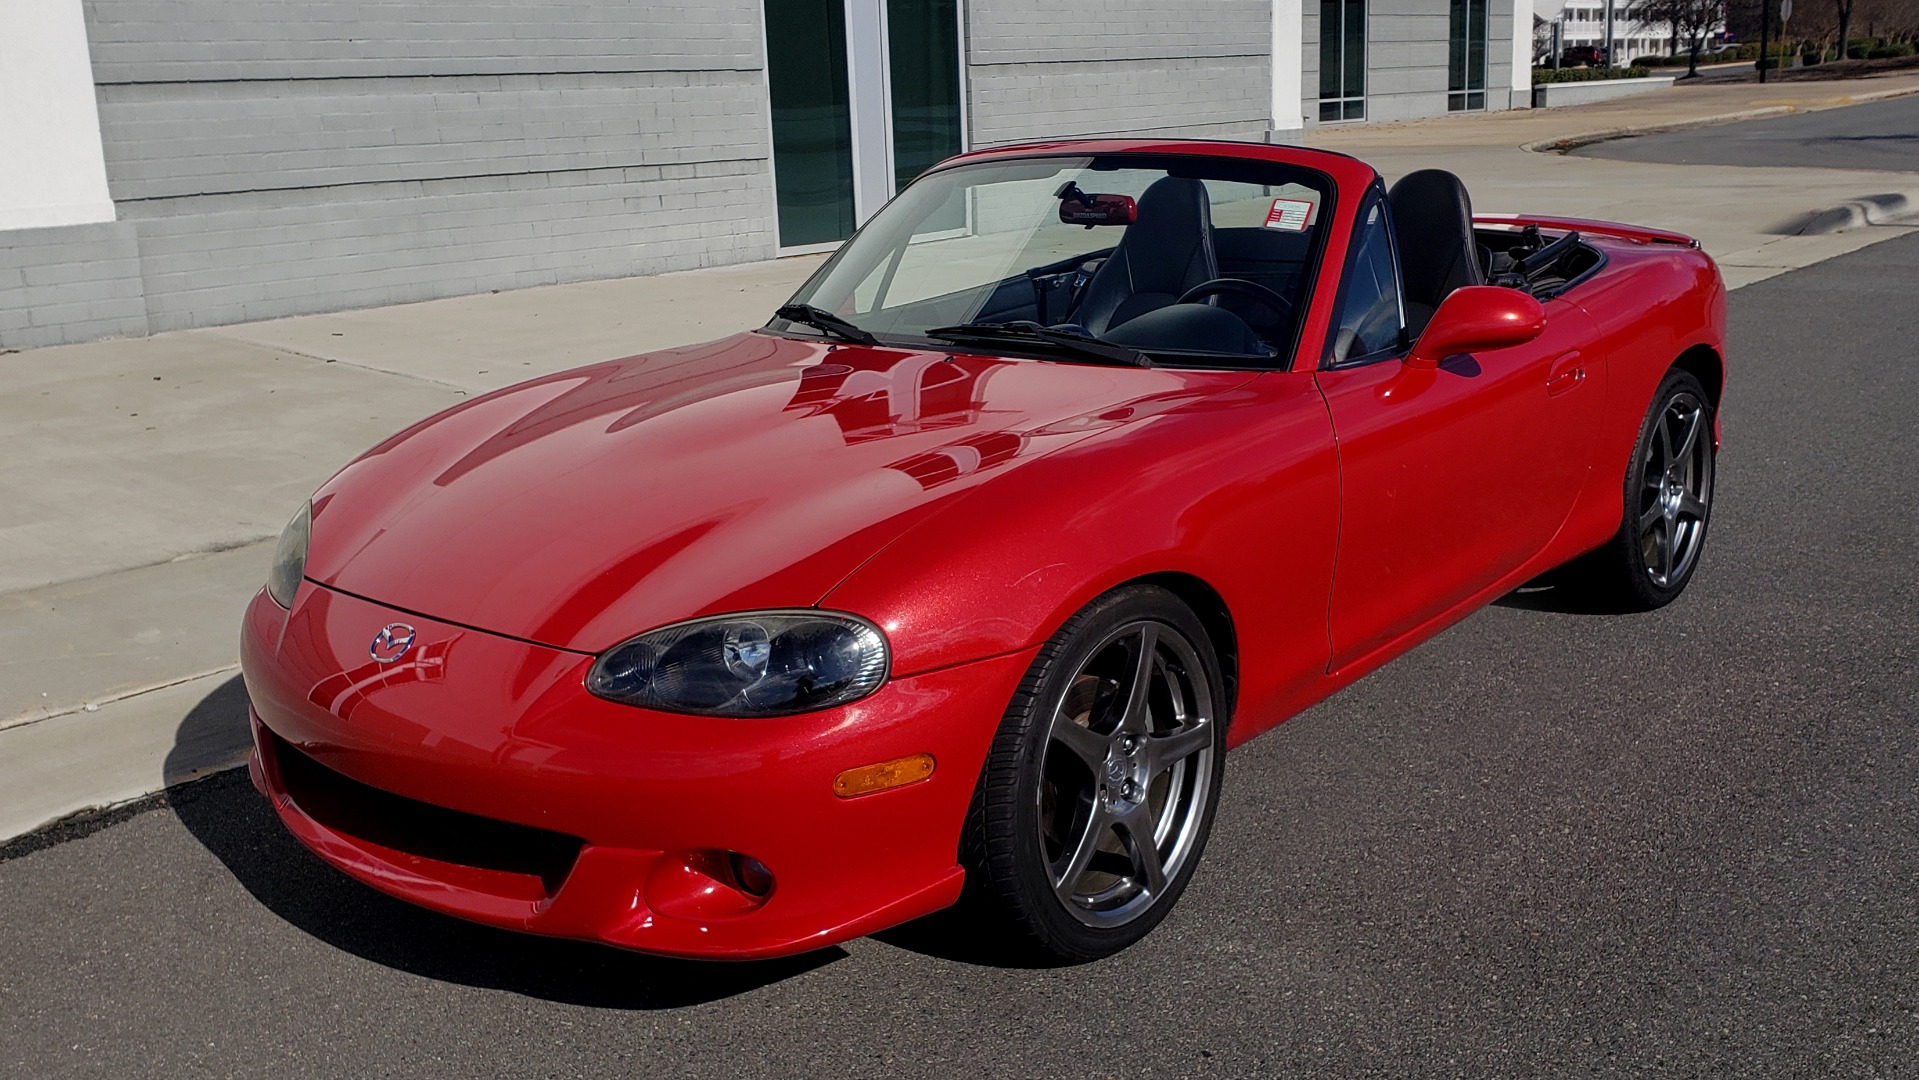 Used 2004 Mazda MX-5 MIATA 2DR CONVERTIBLE MAZDASPEED / GRAND TOURING PKG for sale Sold at Formula Imports in Charlotte NC 28227 3